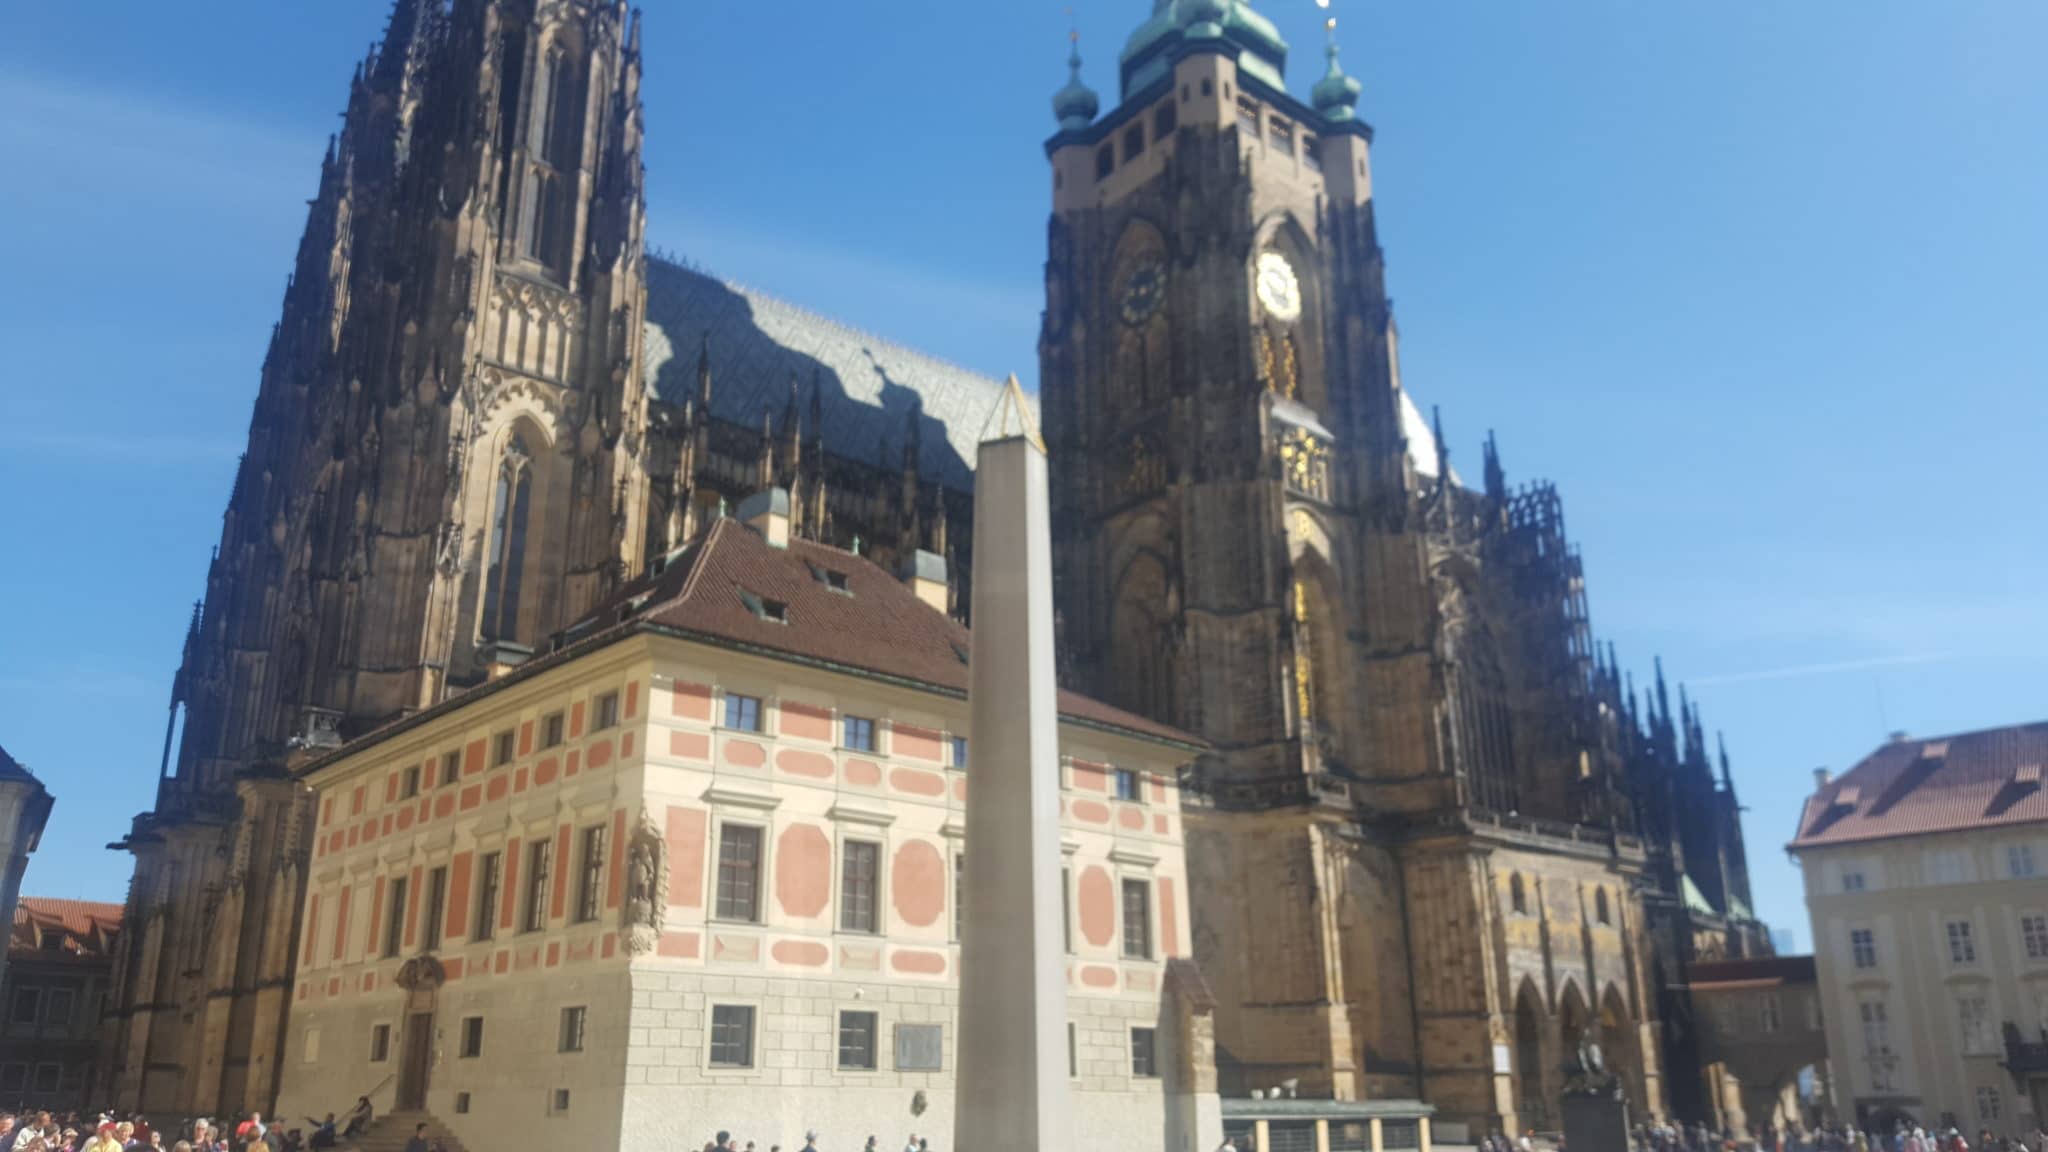 Castle Quarter - Top 10 Things to See and Do in Prague